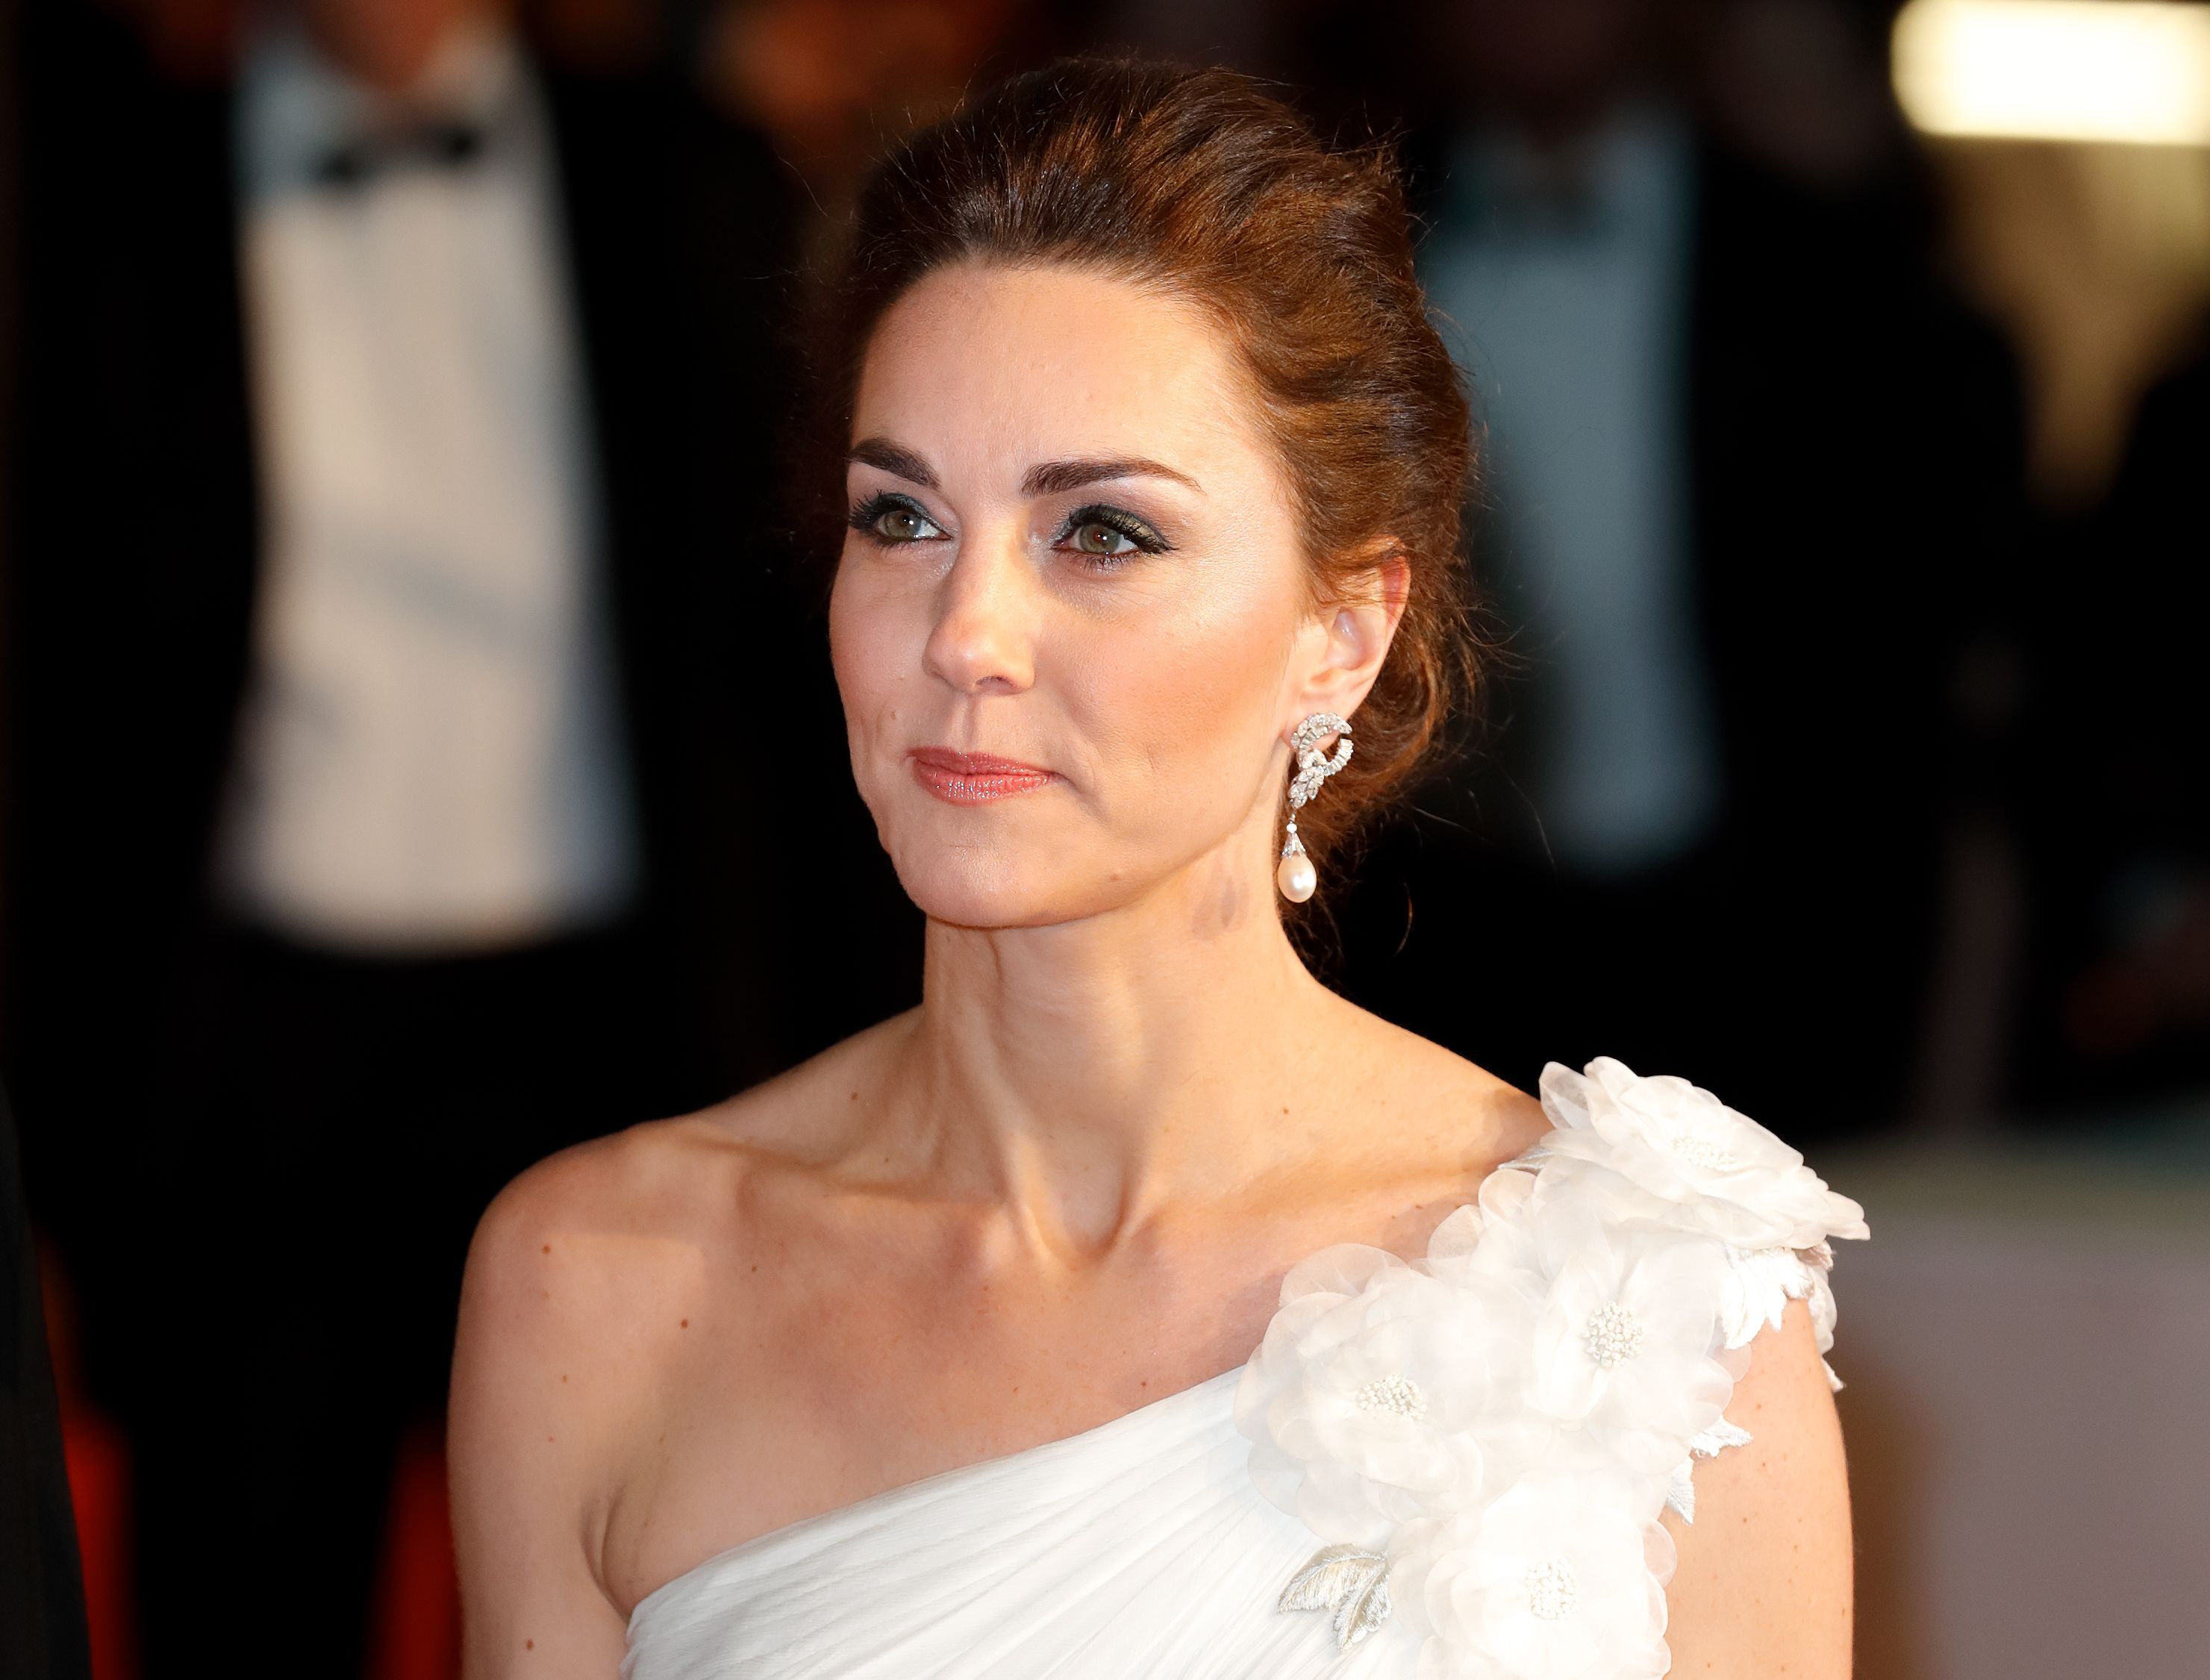 Kate Middleton stuns on BAFTA red carpet in white and gold gown | Bafta red  carpet, Royal gown, Prince william and kate